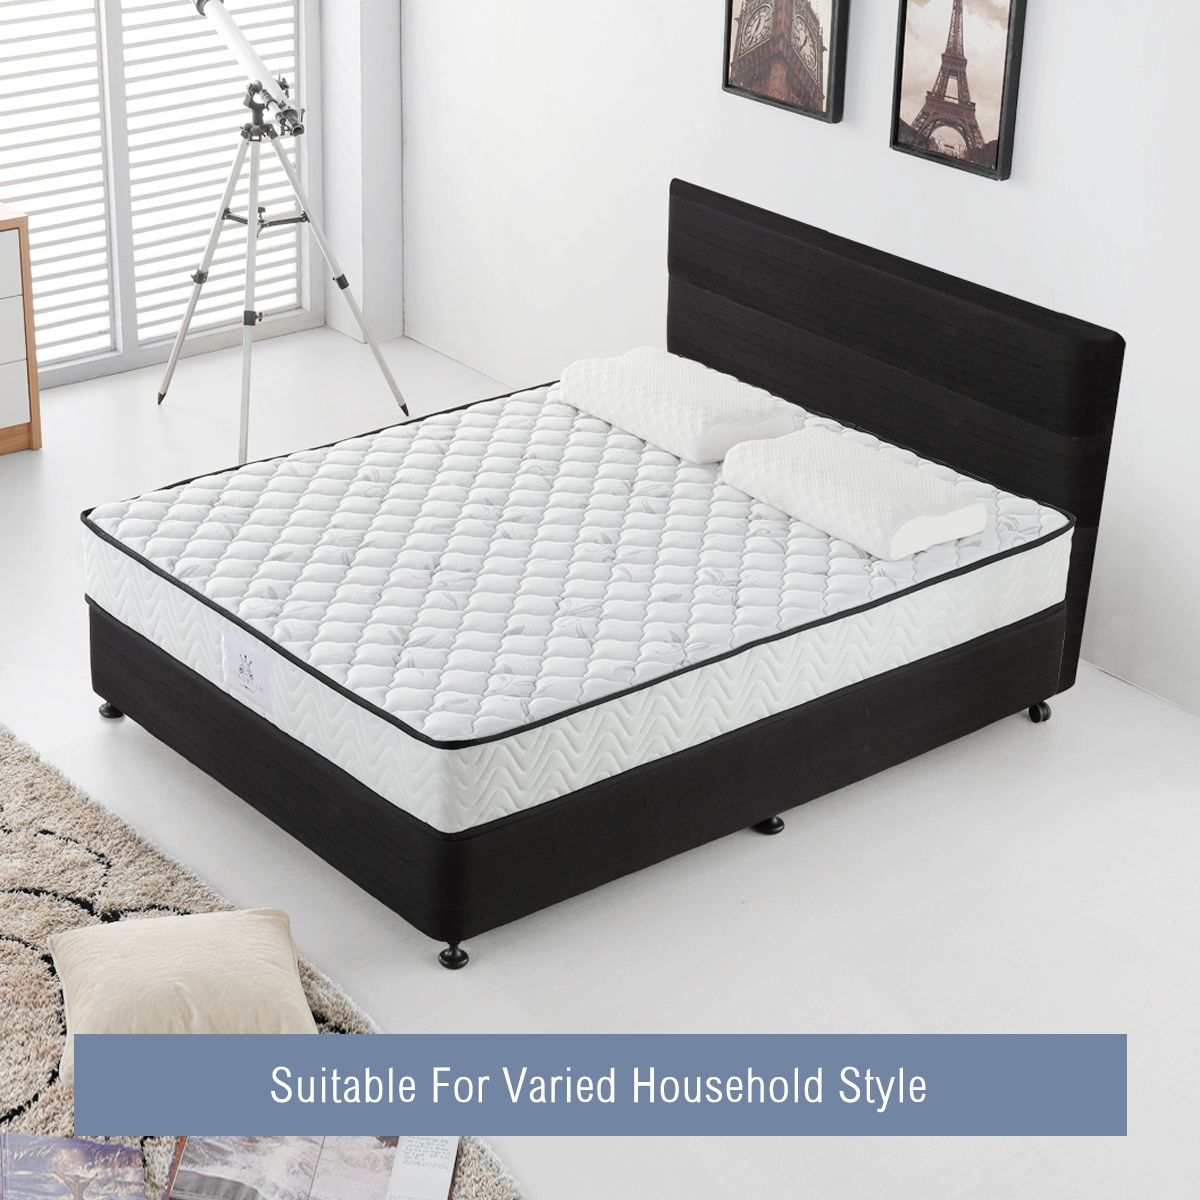 Double Bed With Mattress For Sale Uk 100% Better Using These Strategies